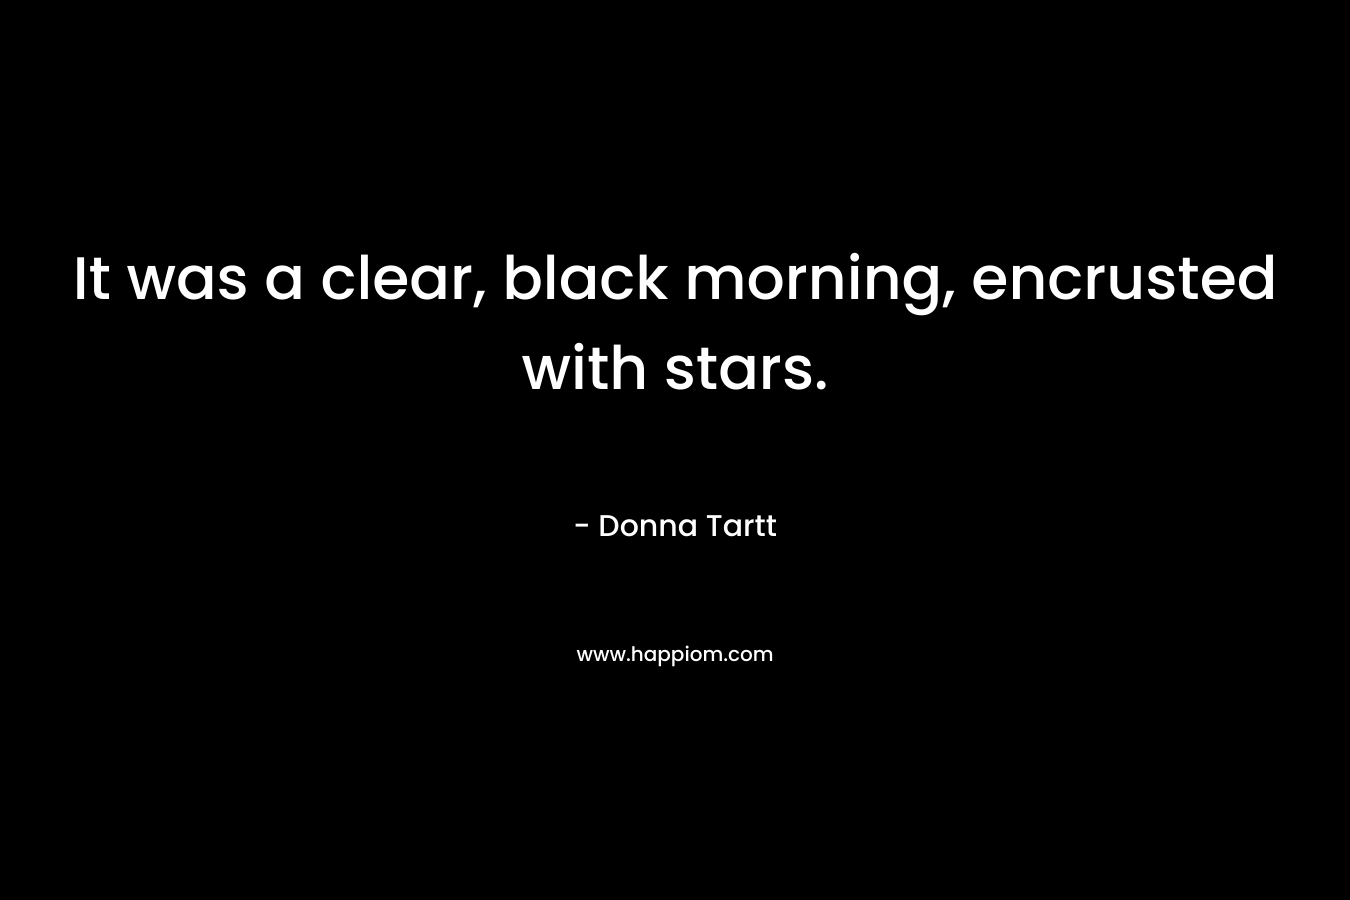 It was a clear, black morning, encrusted with stars.